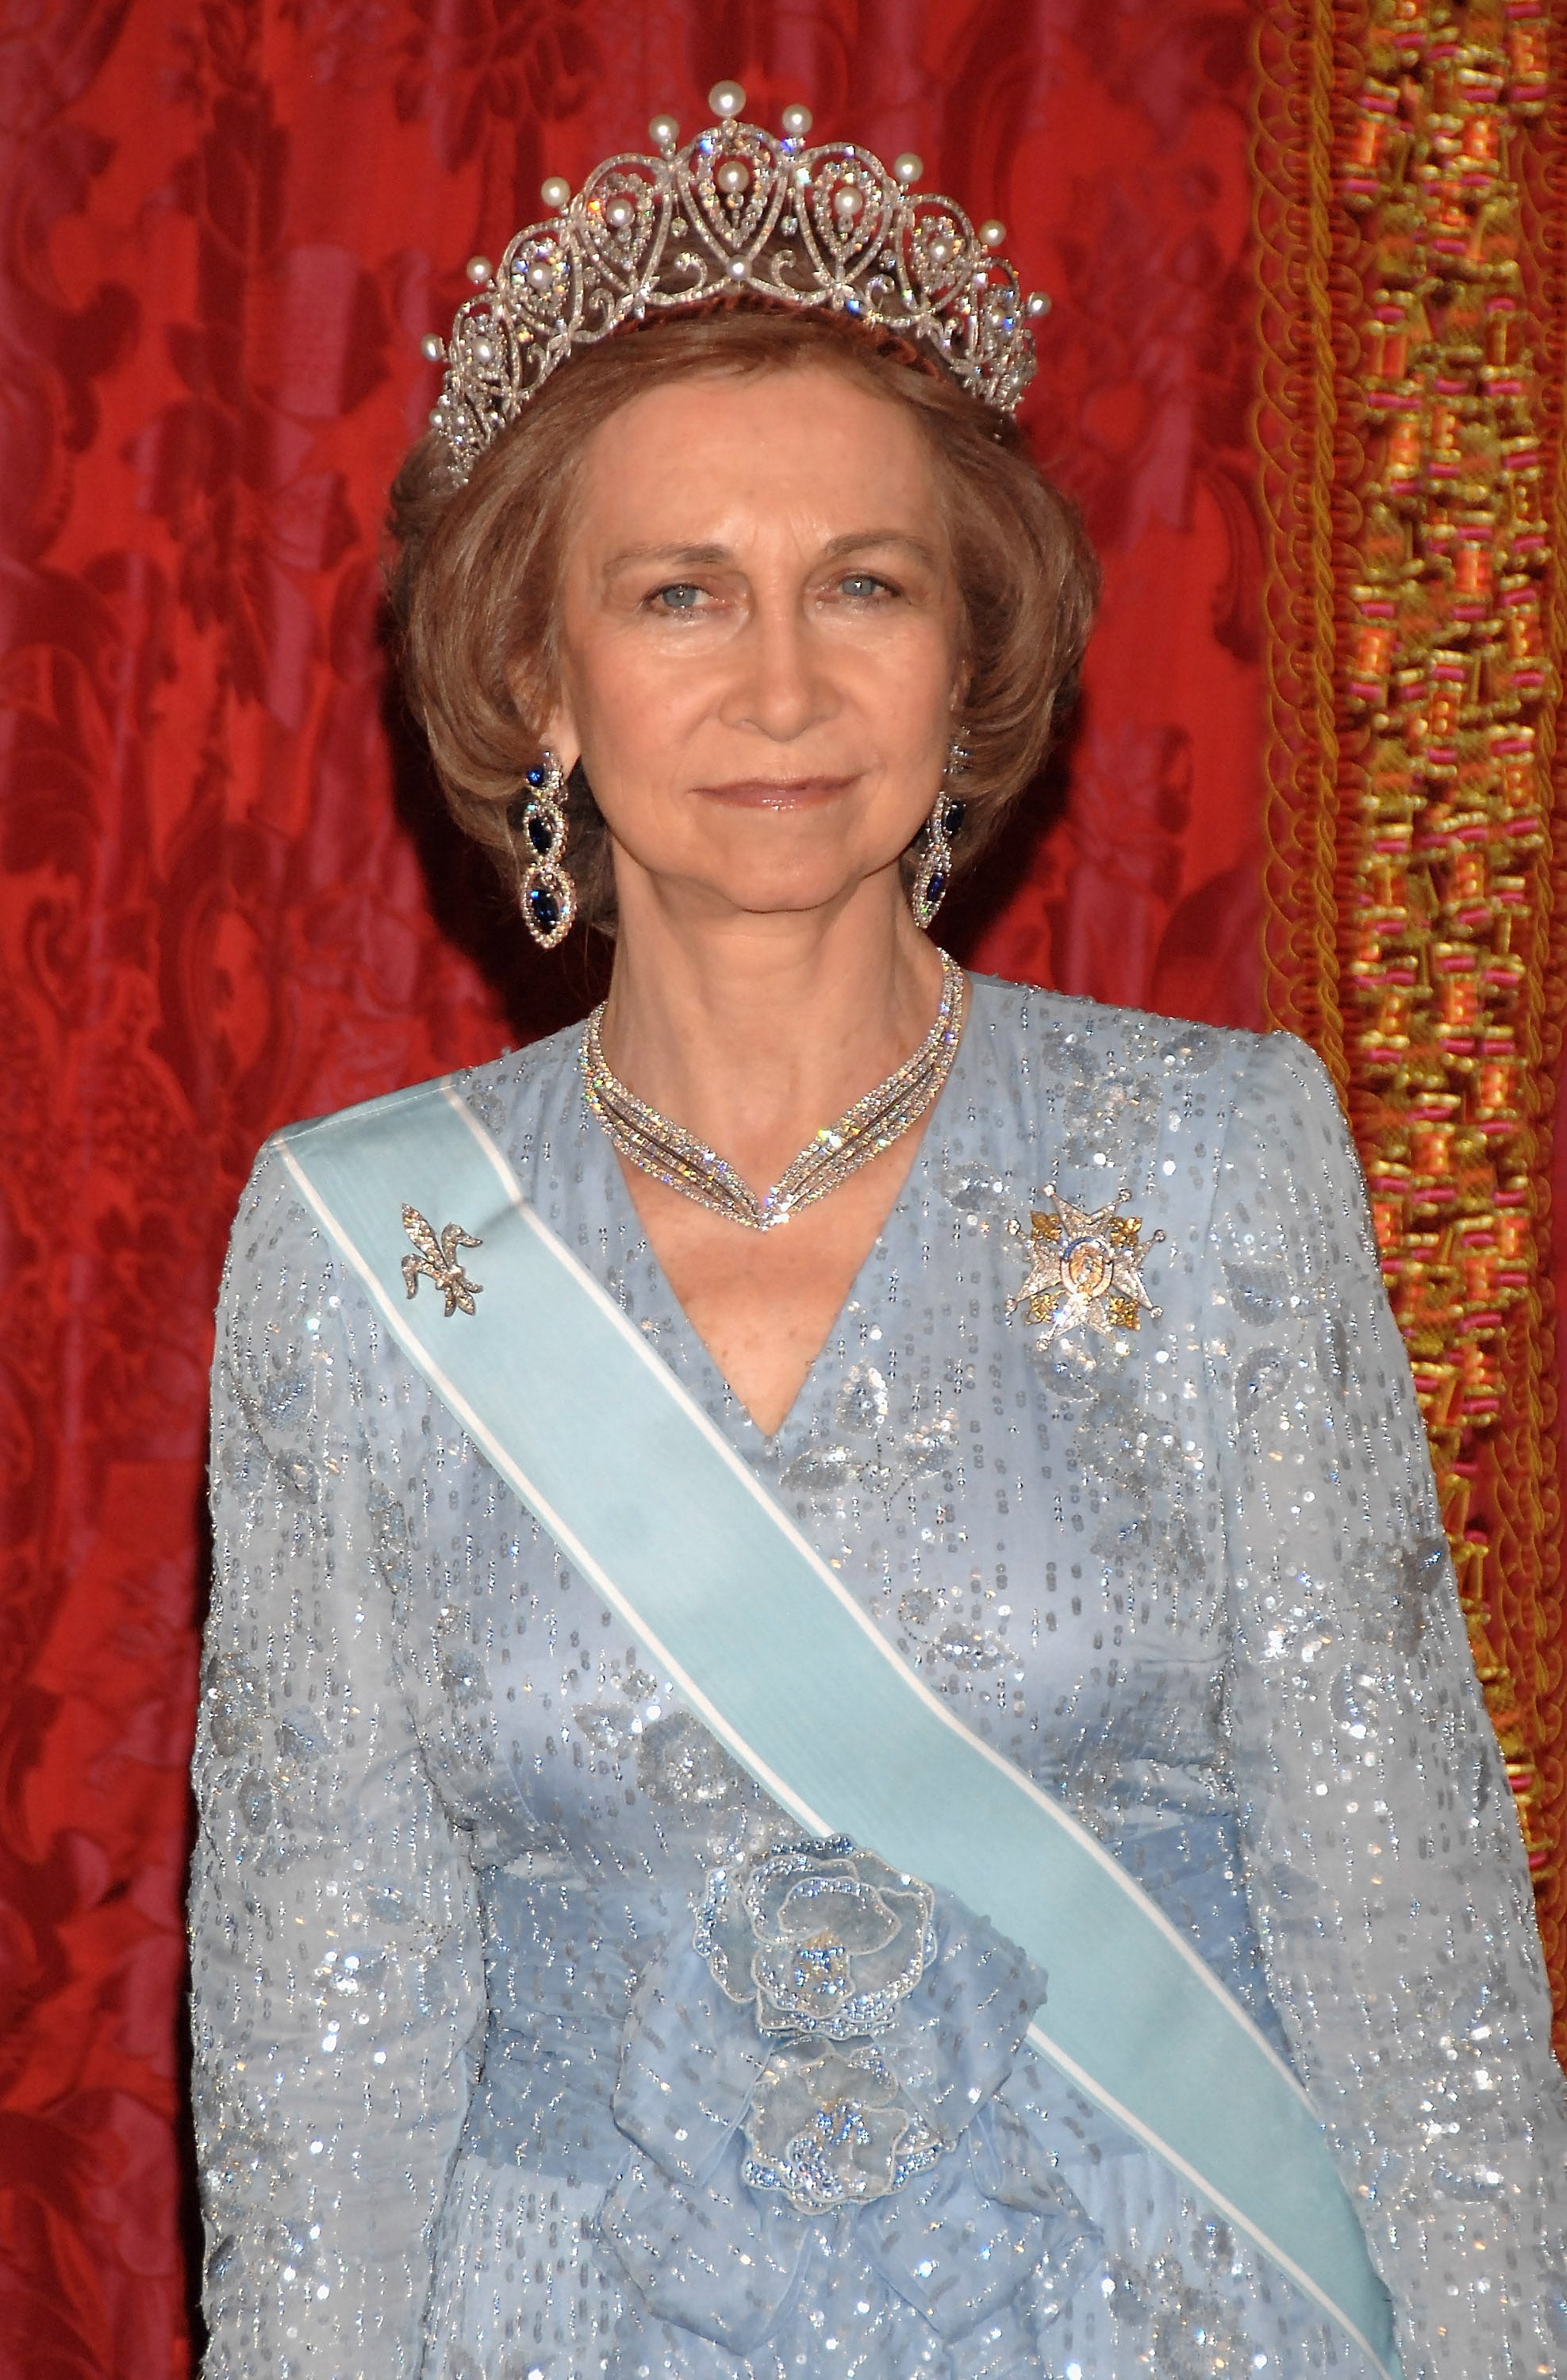 Spain: The Cartier Loop Tiara | The 10 Most Exquisite and Extravagant ...